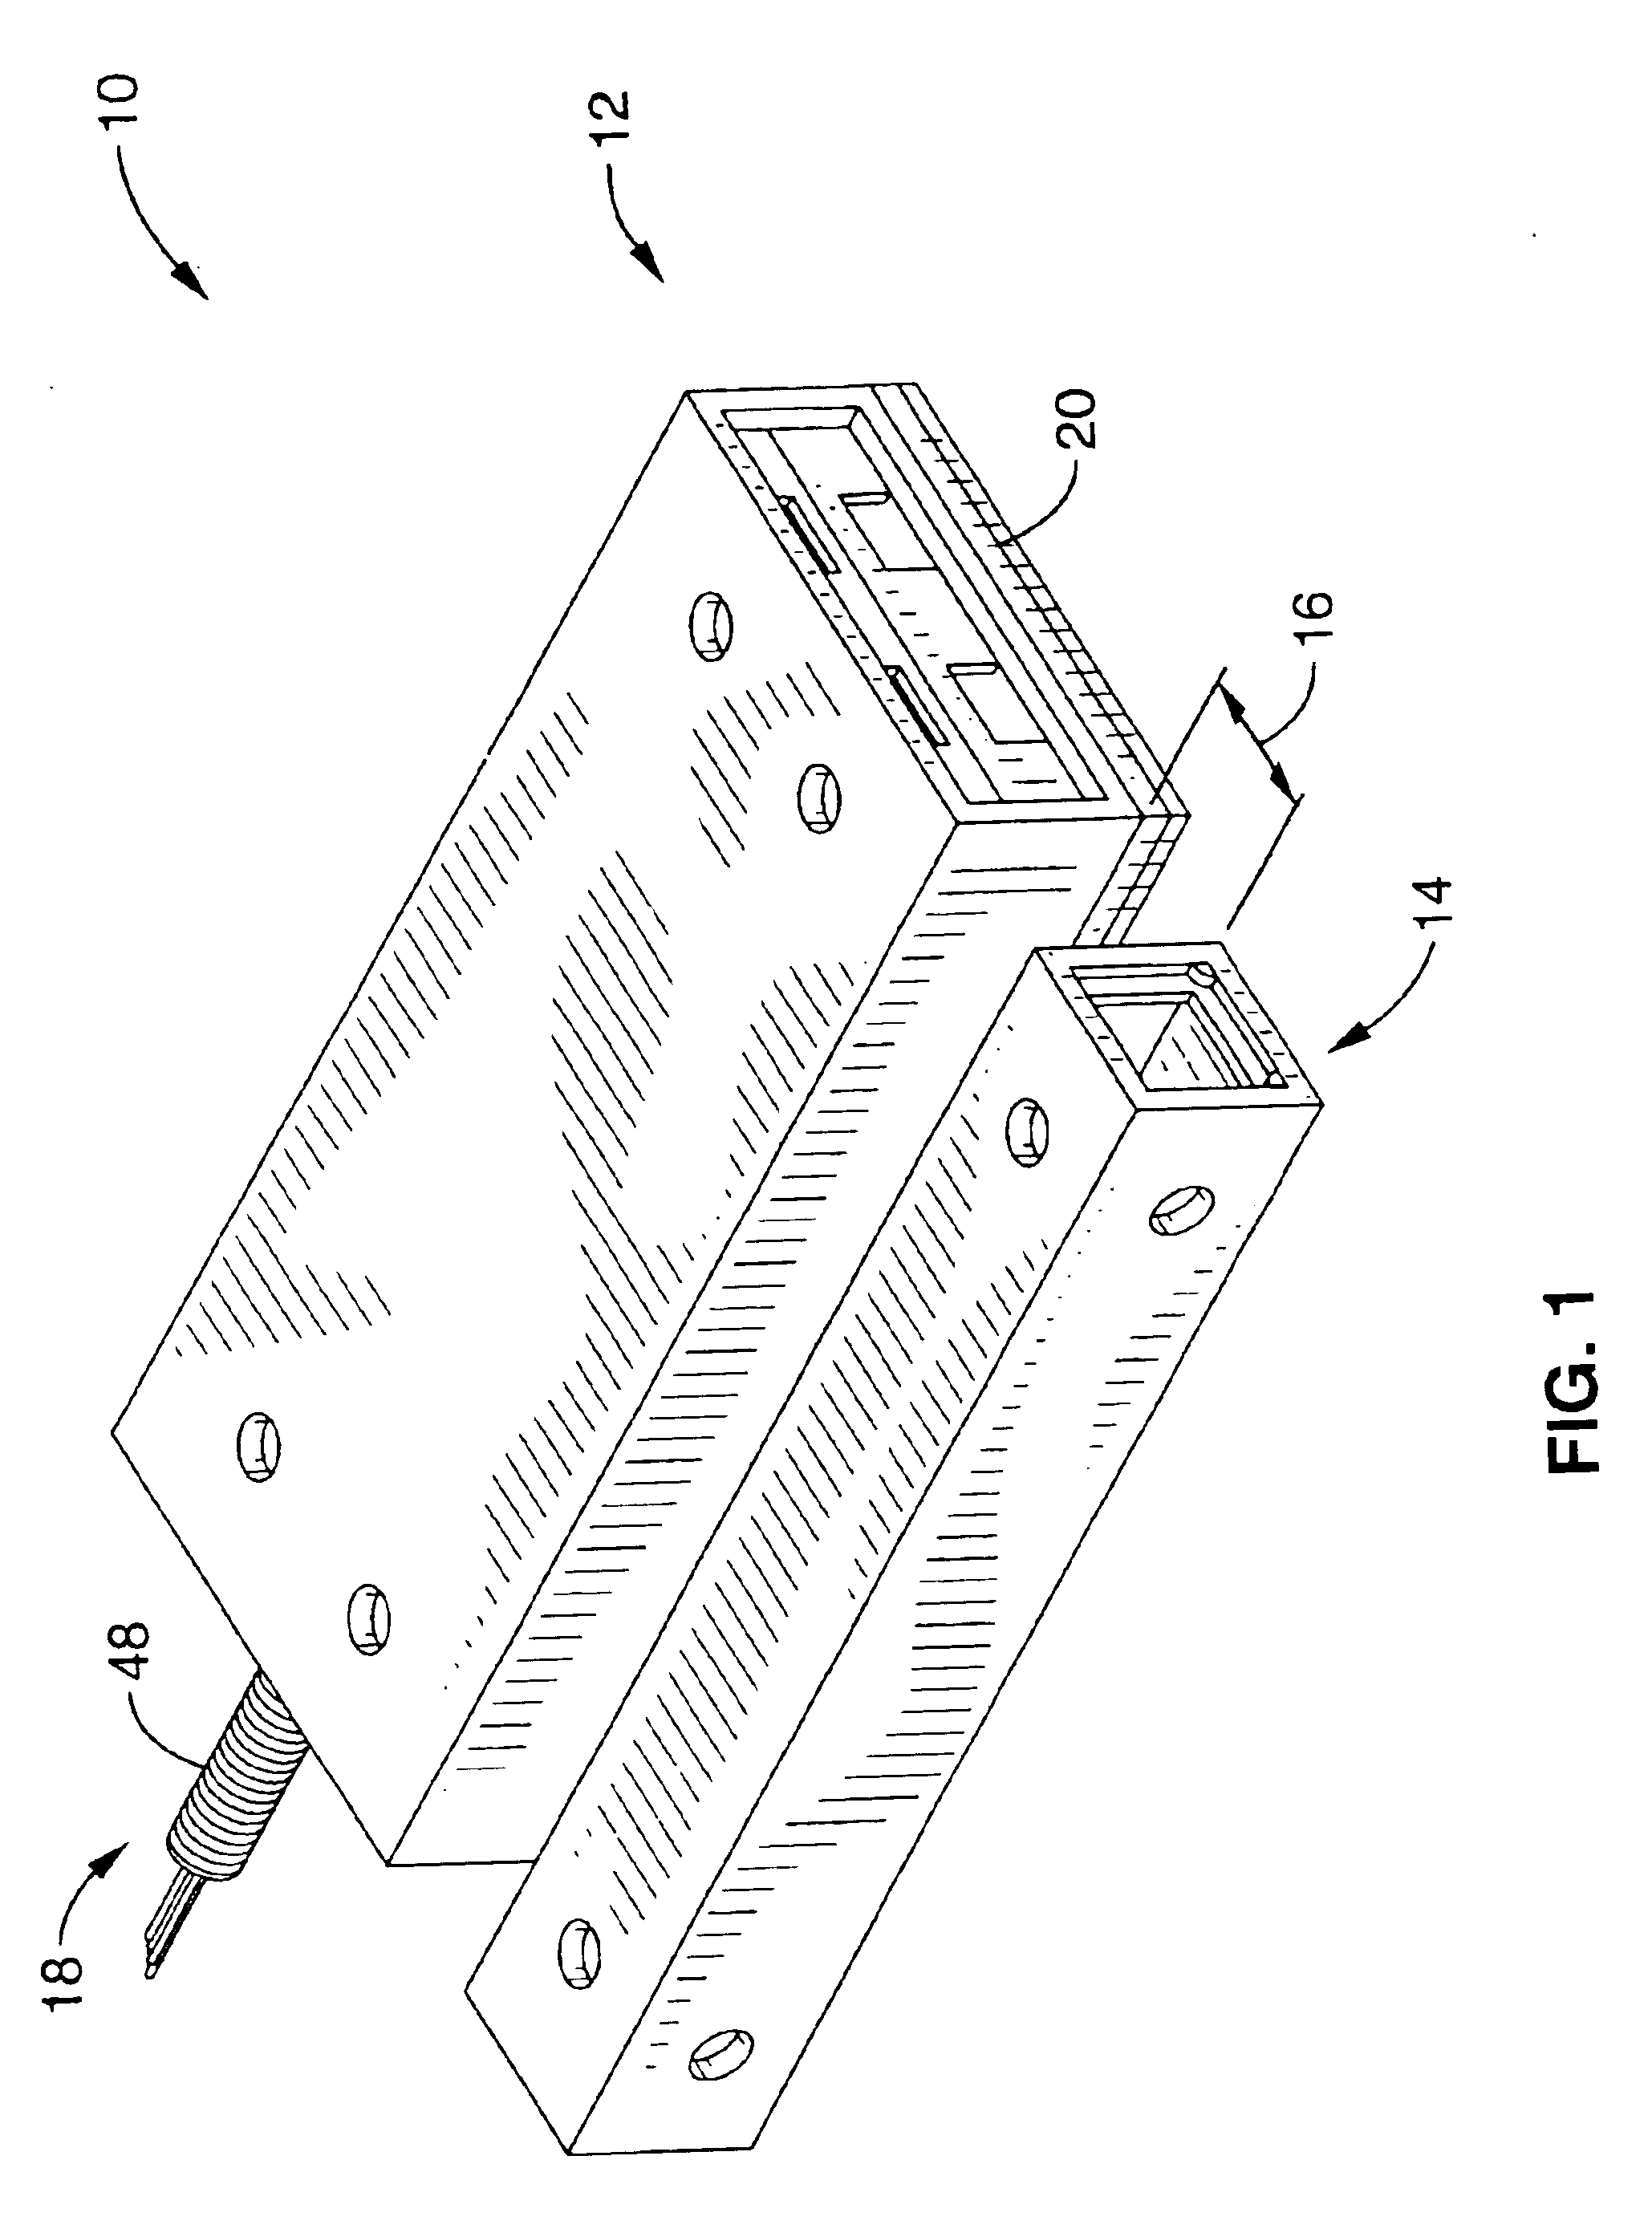 Tamper resistant magnetic contact apparatus for security systems